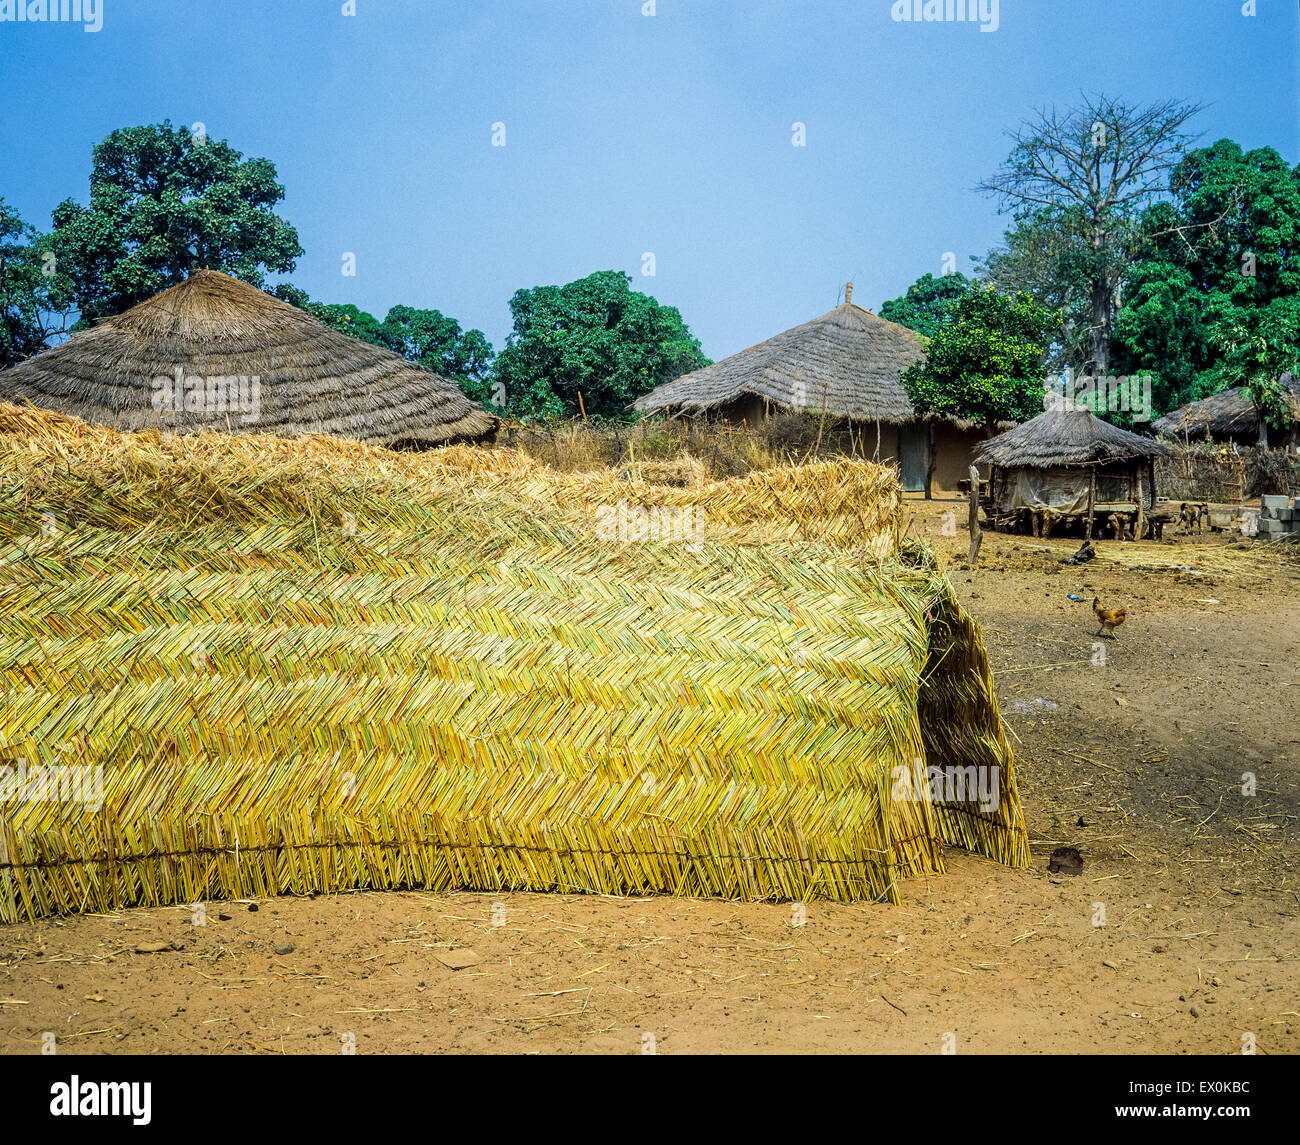 Woven reed screens for walling or fencing and thatched huts, Juffureh village, Gambia, West Africa Stock Photo